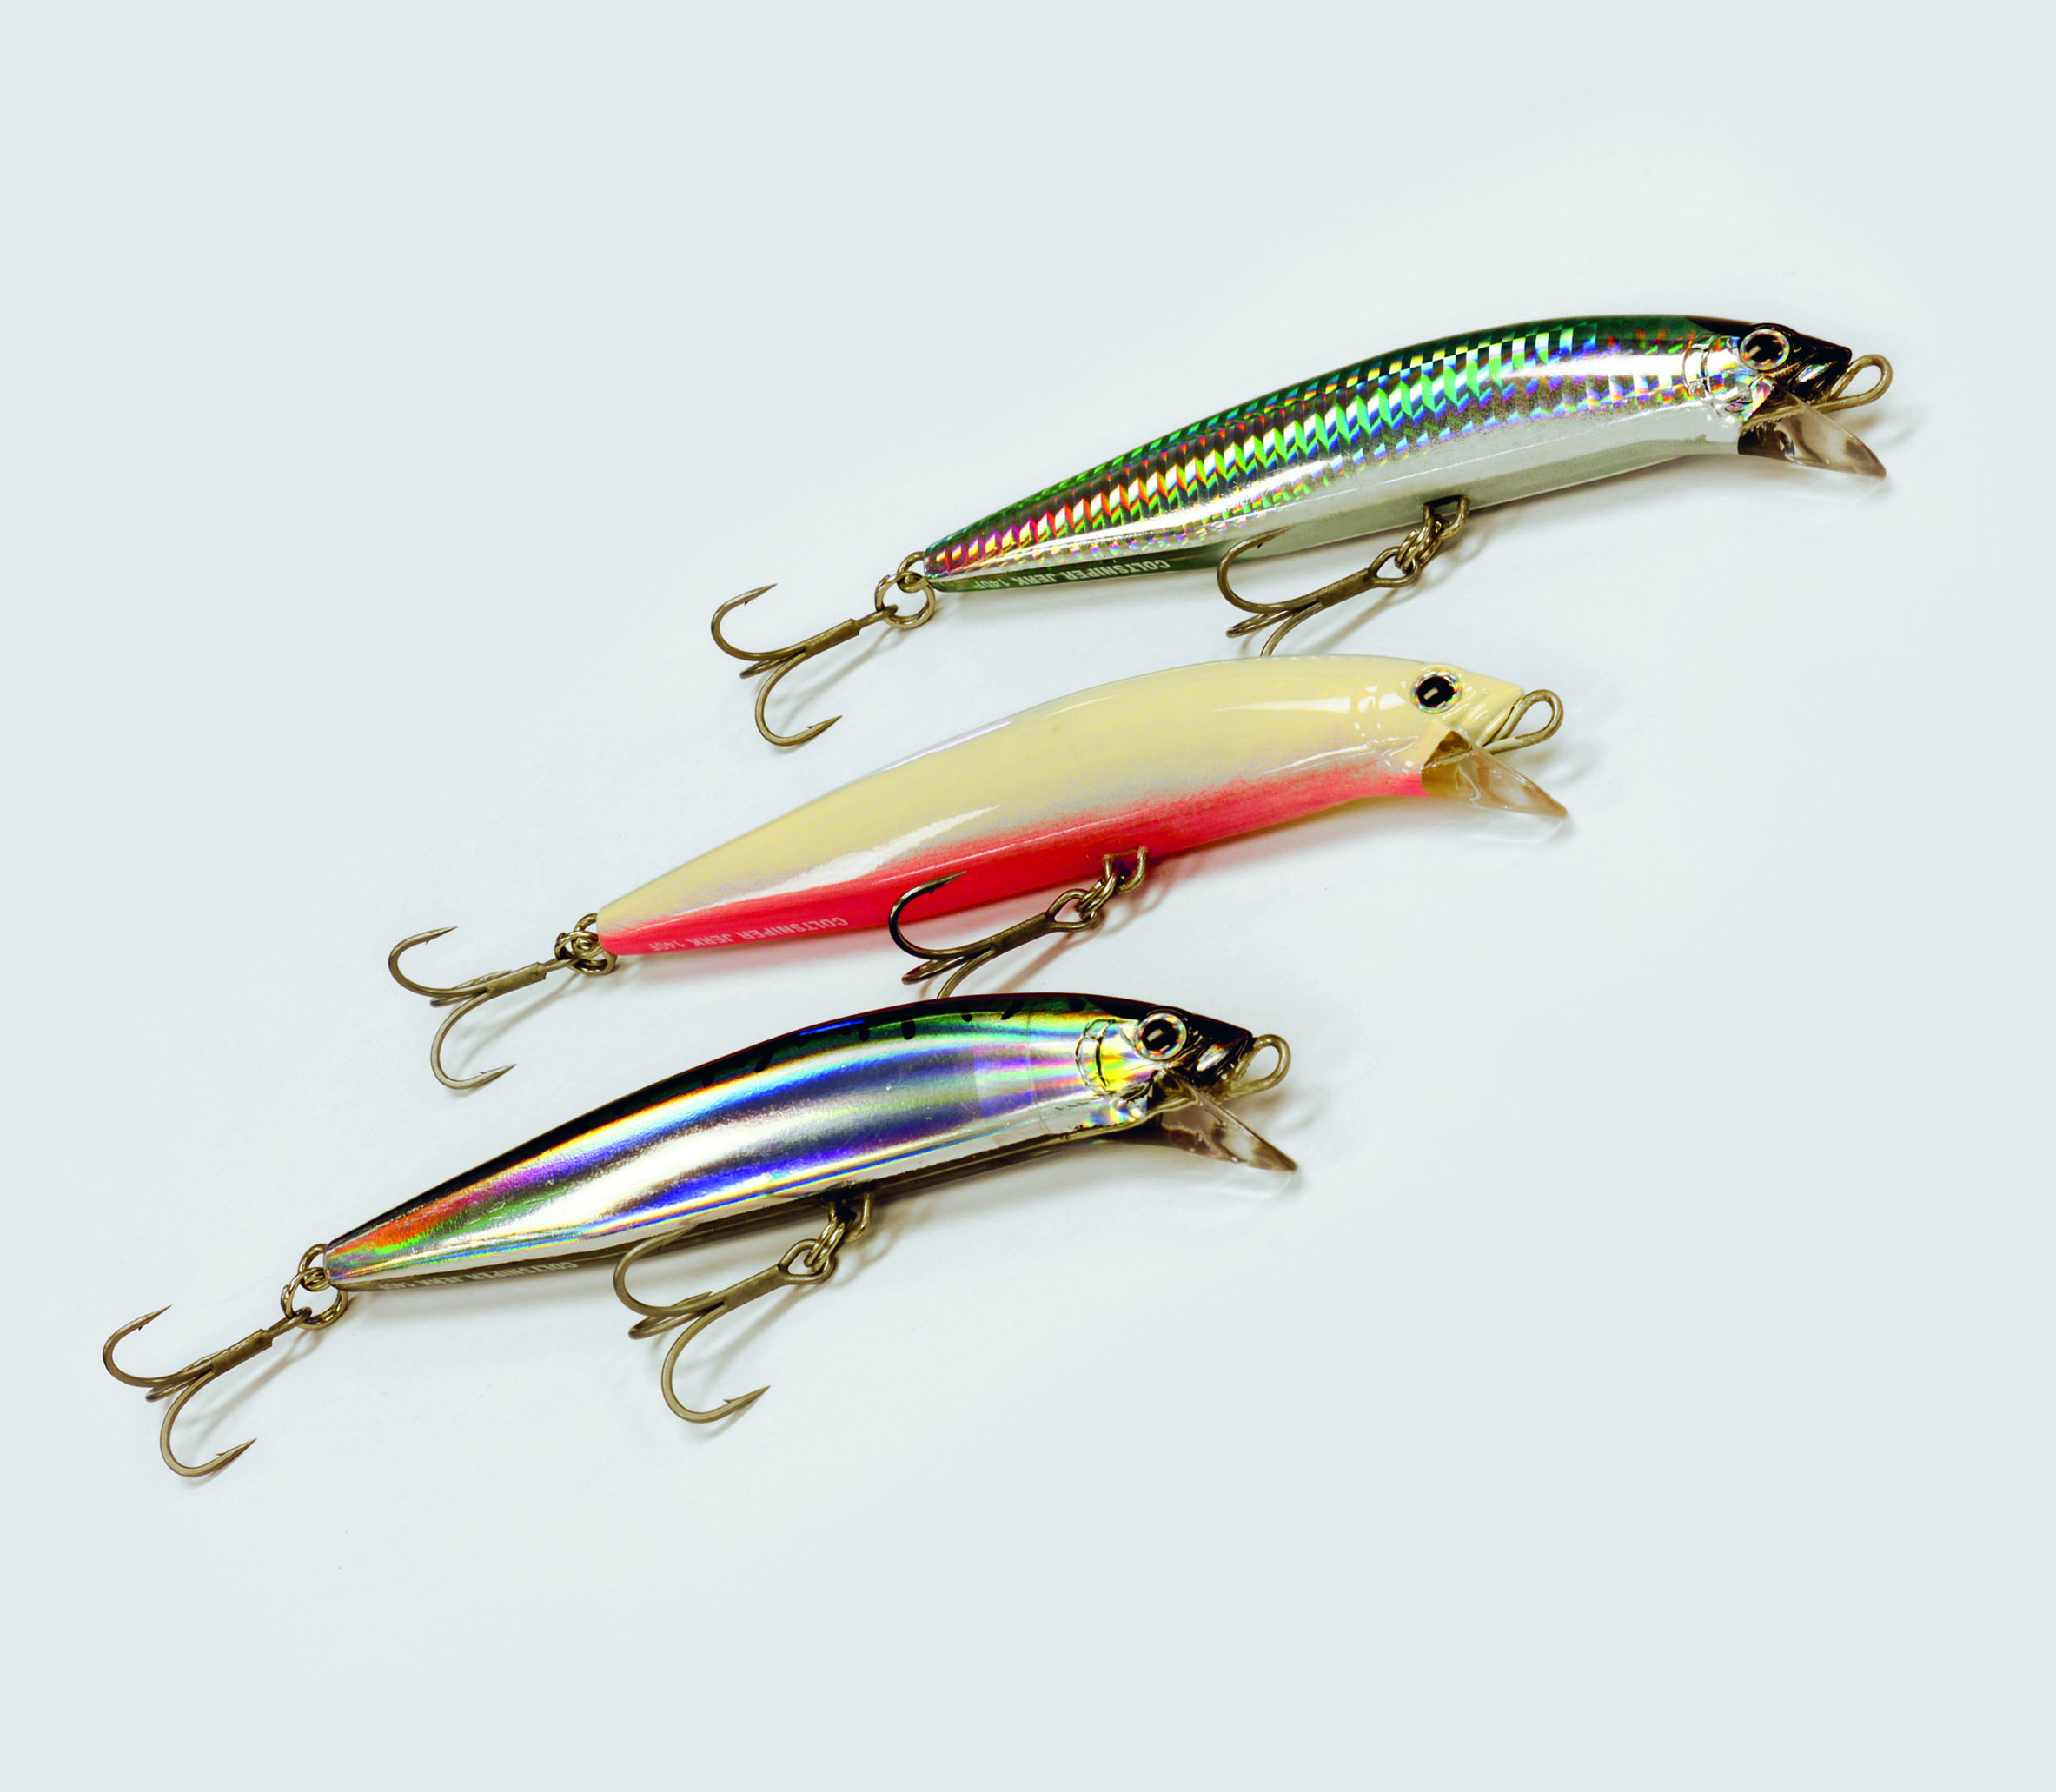 Featured Lure: Shimano Coltsniper - On The Water